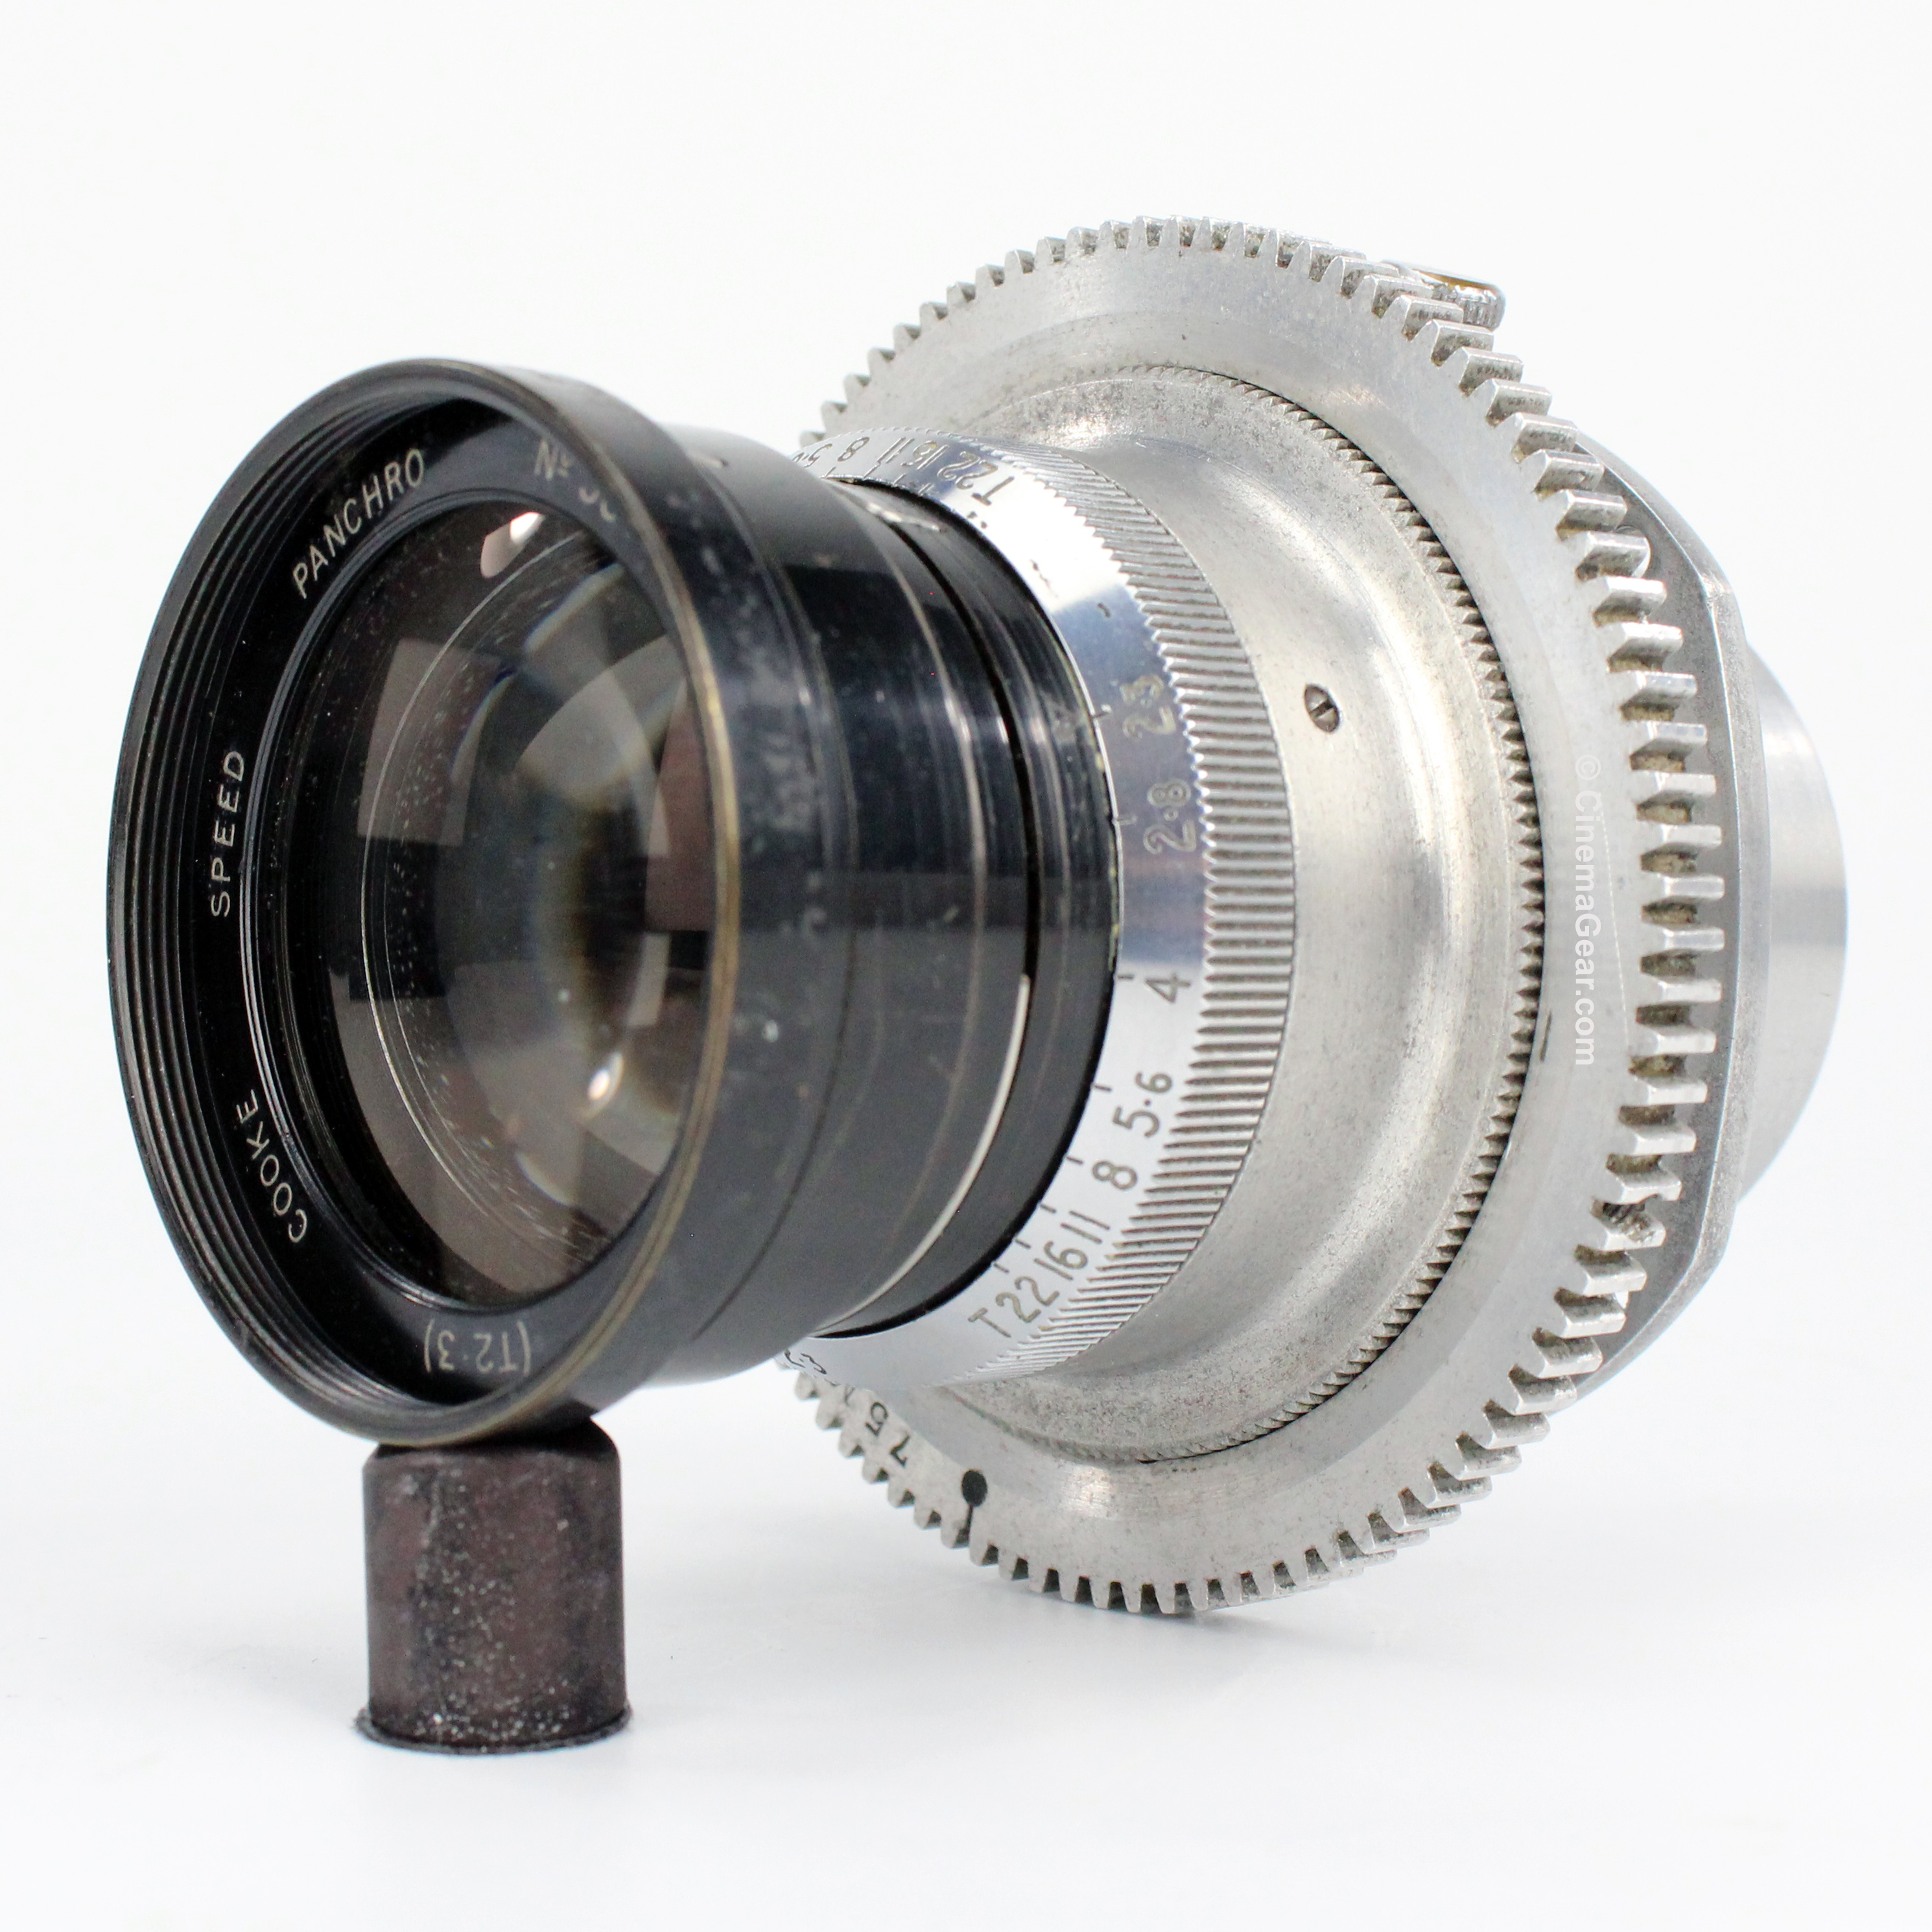 Cooke Speed Panchro 75mm T2.3 lens in Mitchell Standard mount.